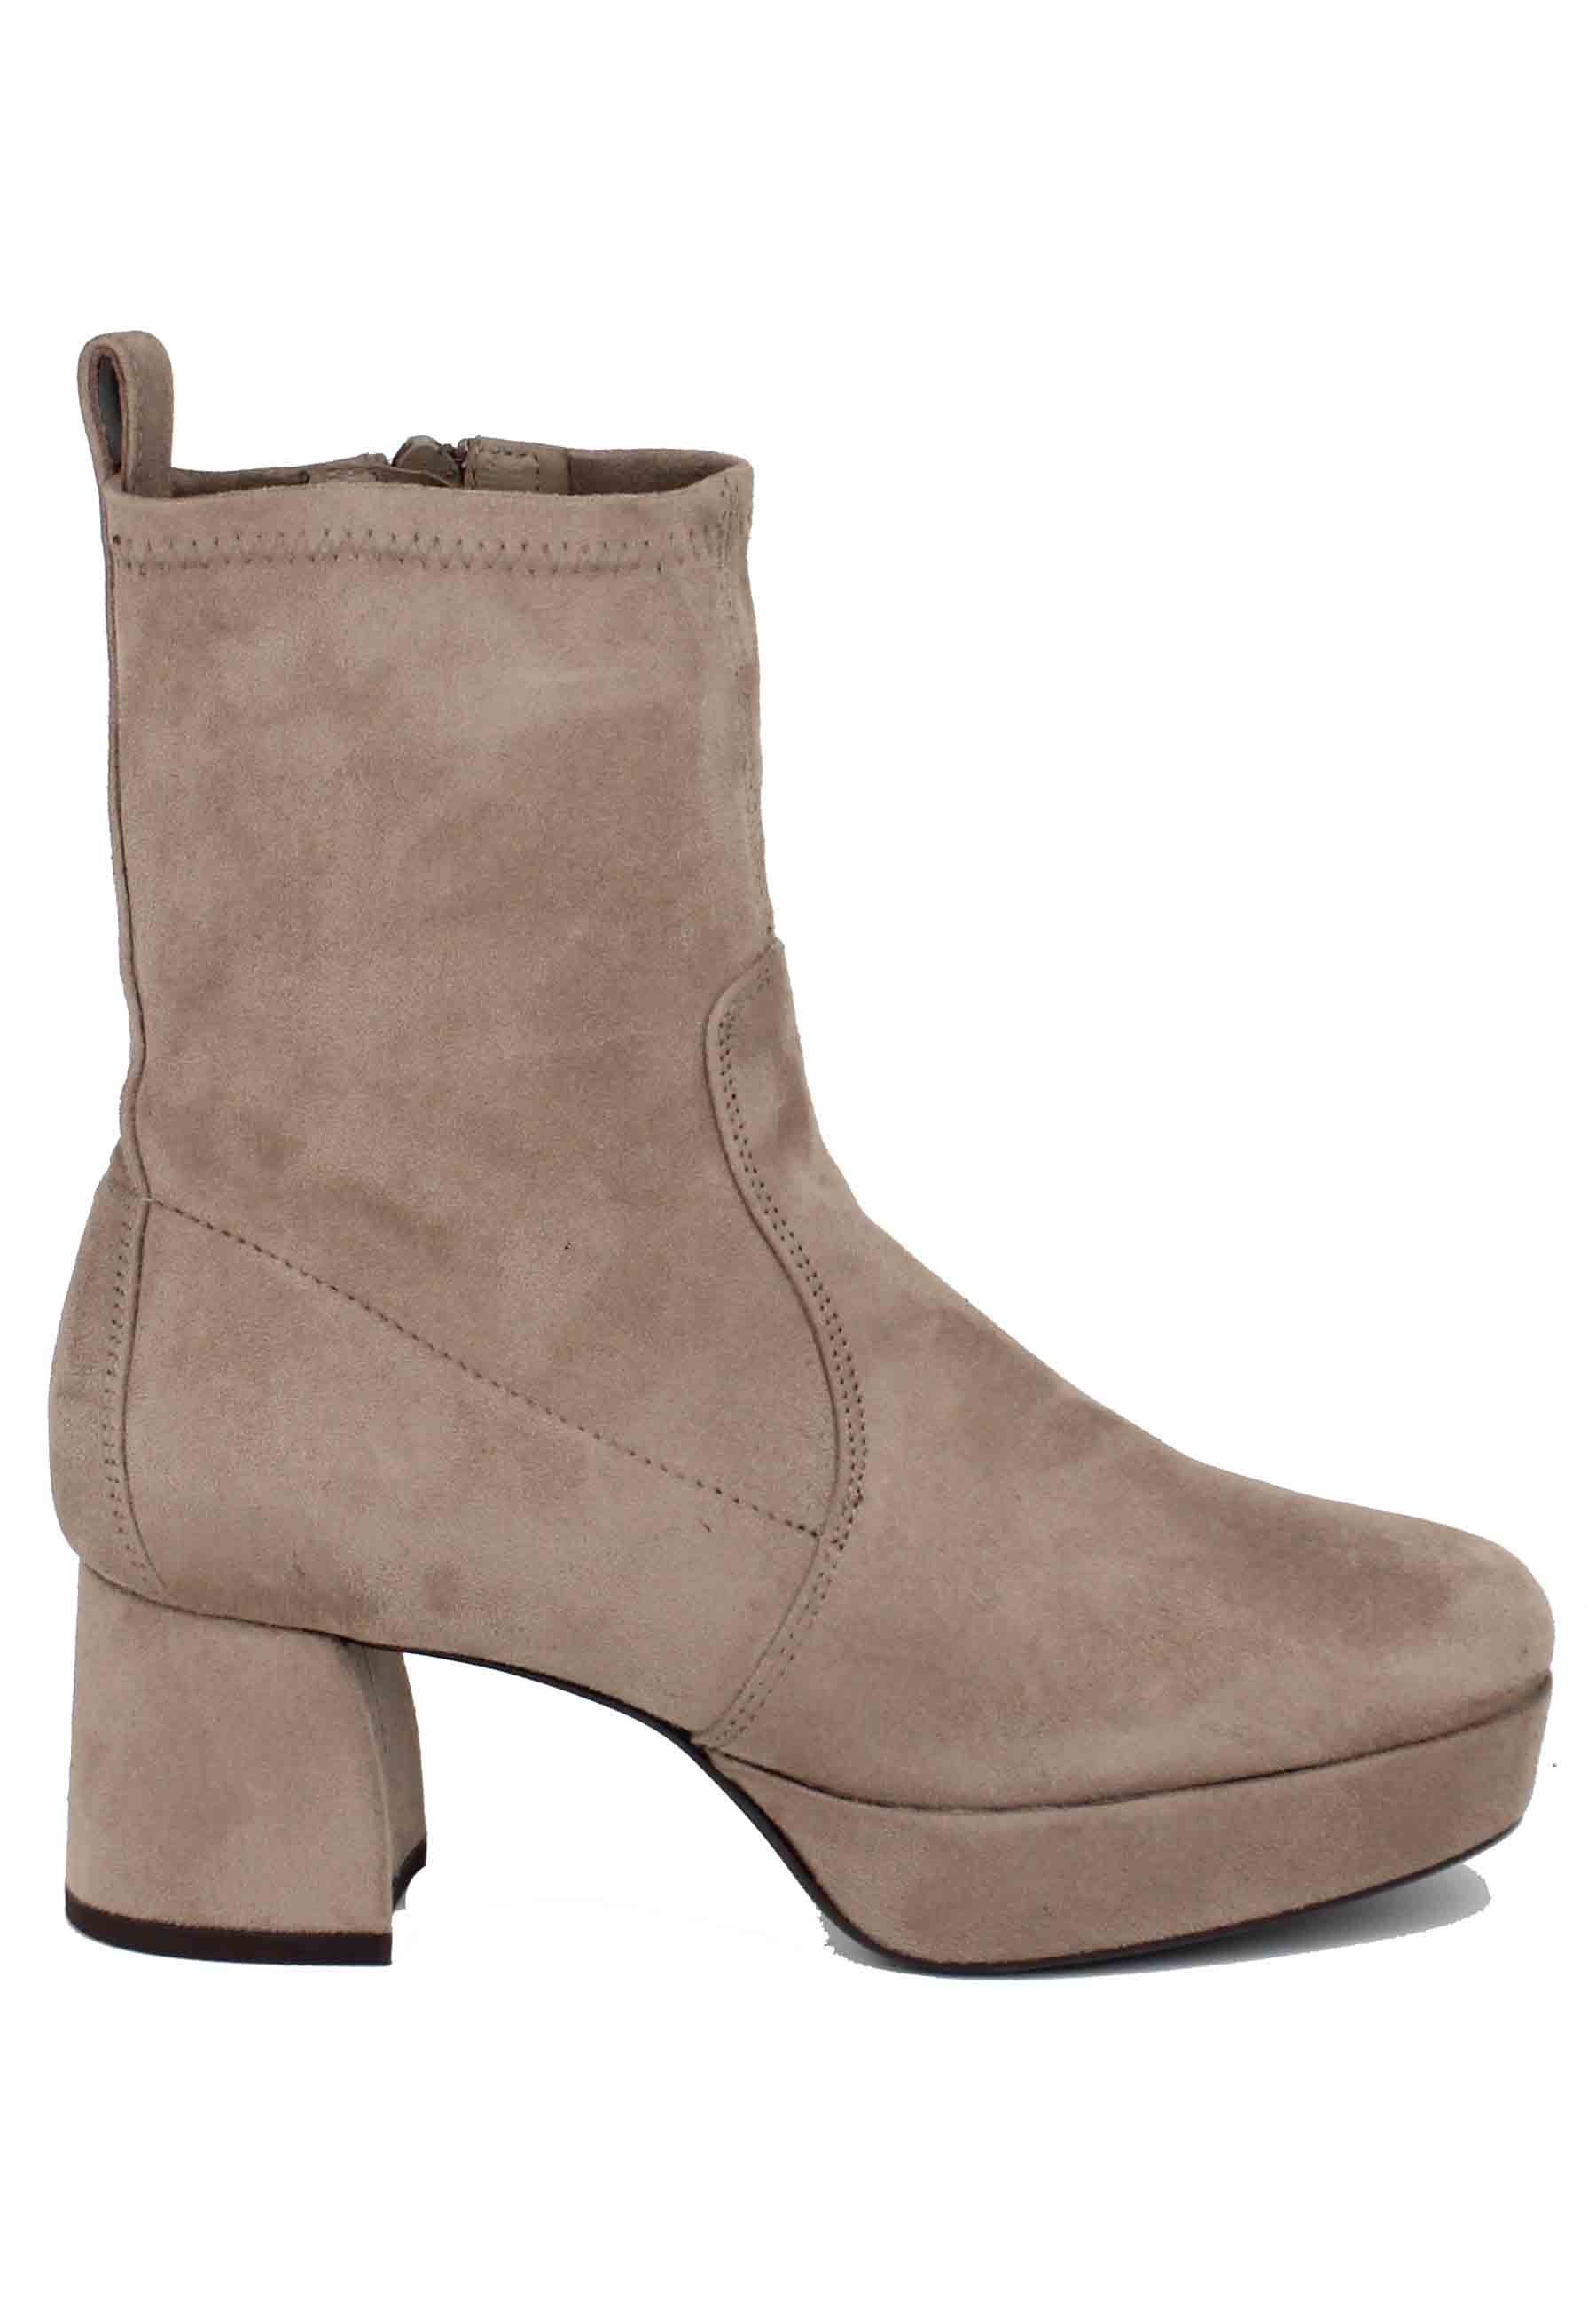 Women's ankle boots in taupe suede with heel and platform